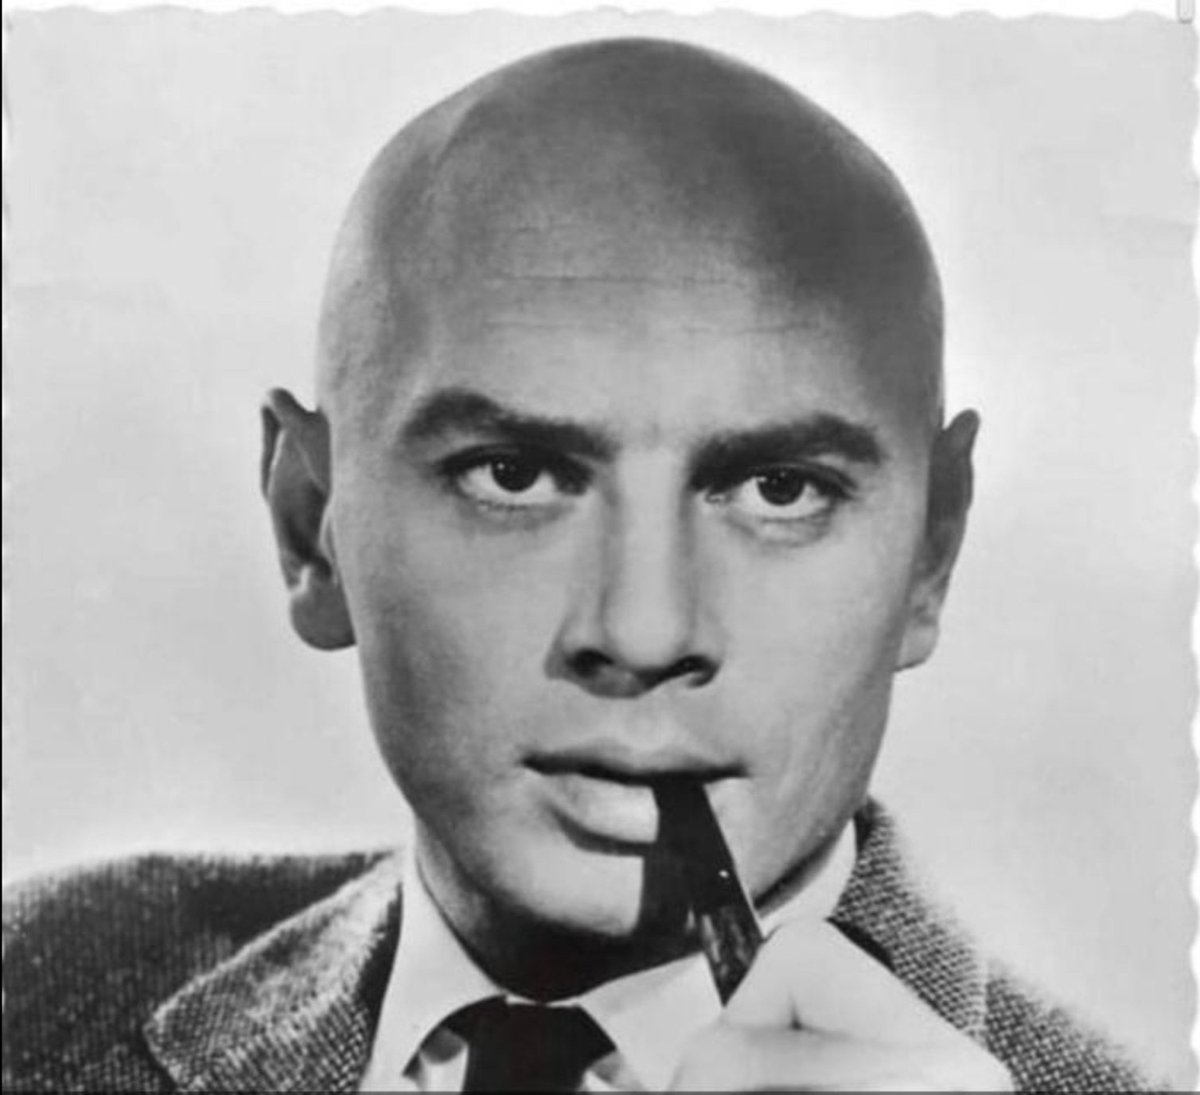 Did you know the actor Yul Brynner was a life long Liverpool fan and he nev...